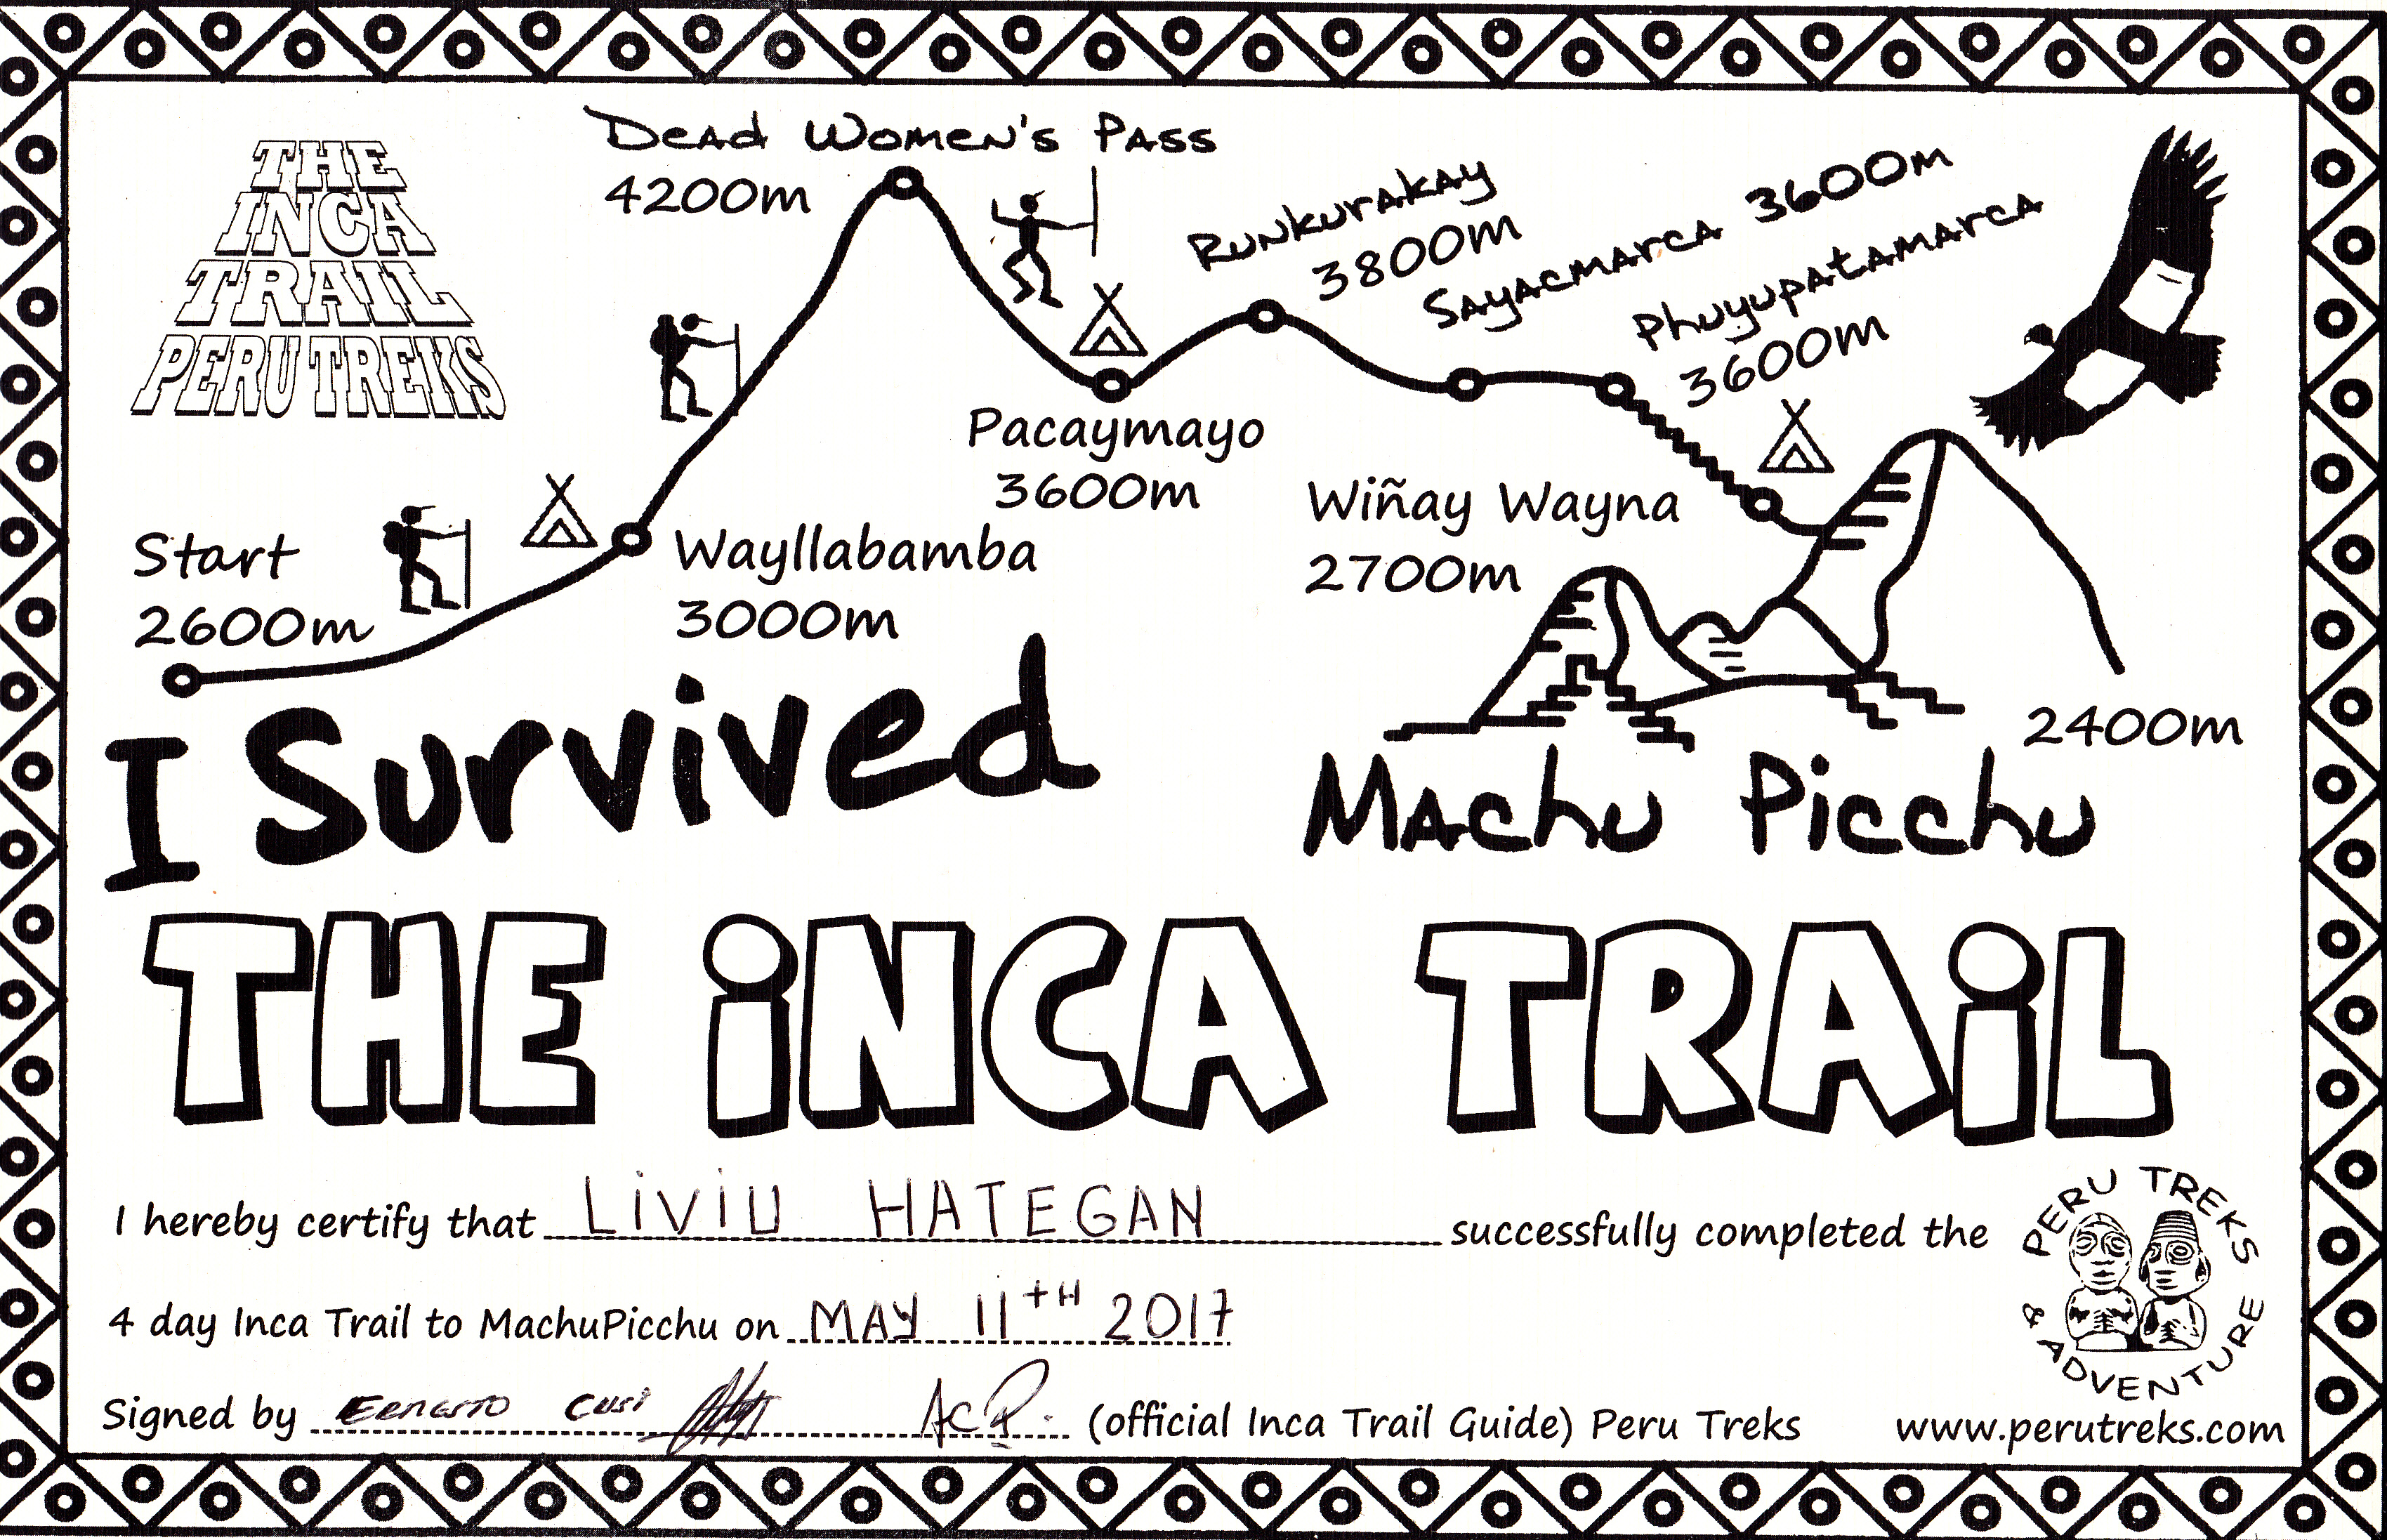 Victory on Inca Trail